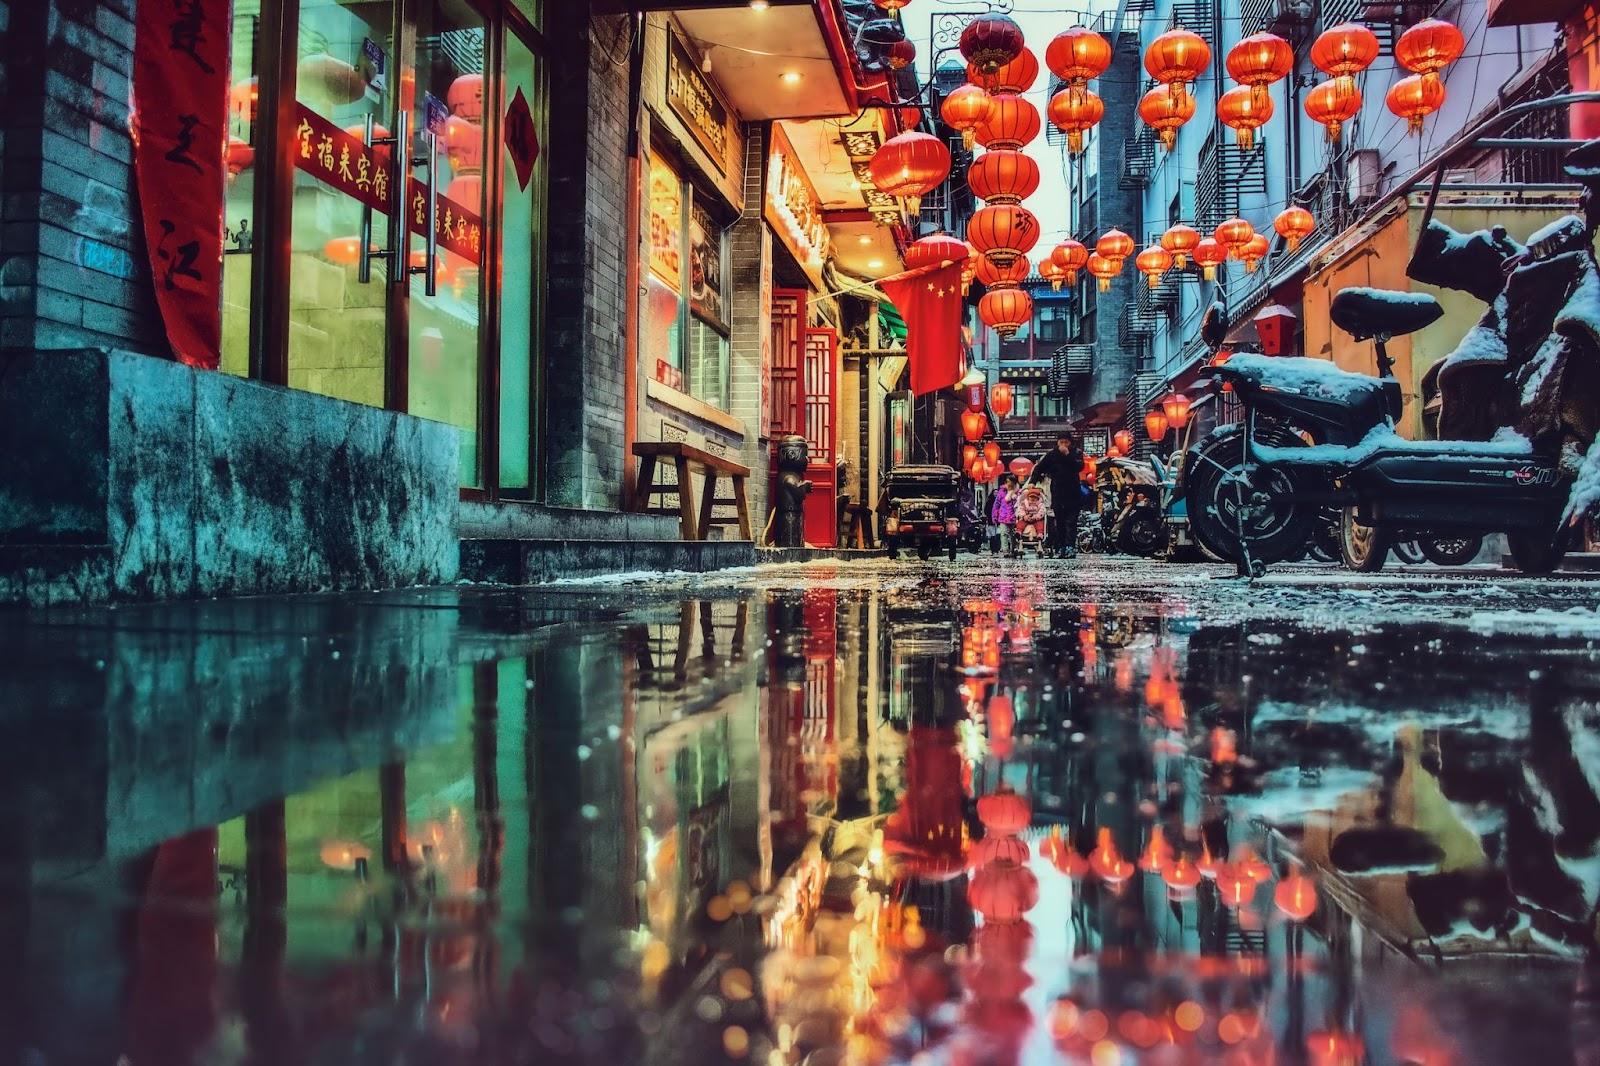 China town in the rain, reflections of red lanterns in puddles